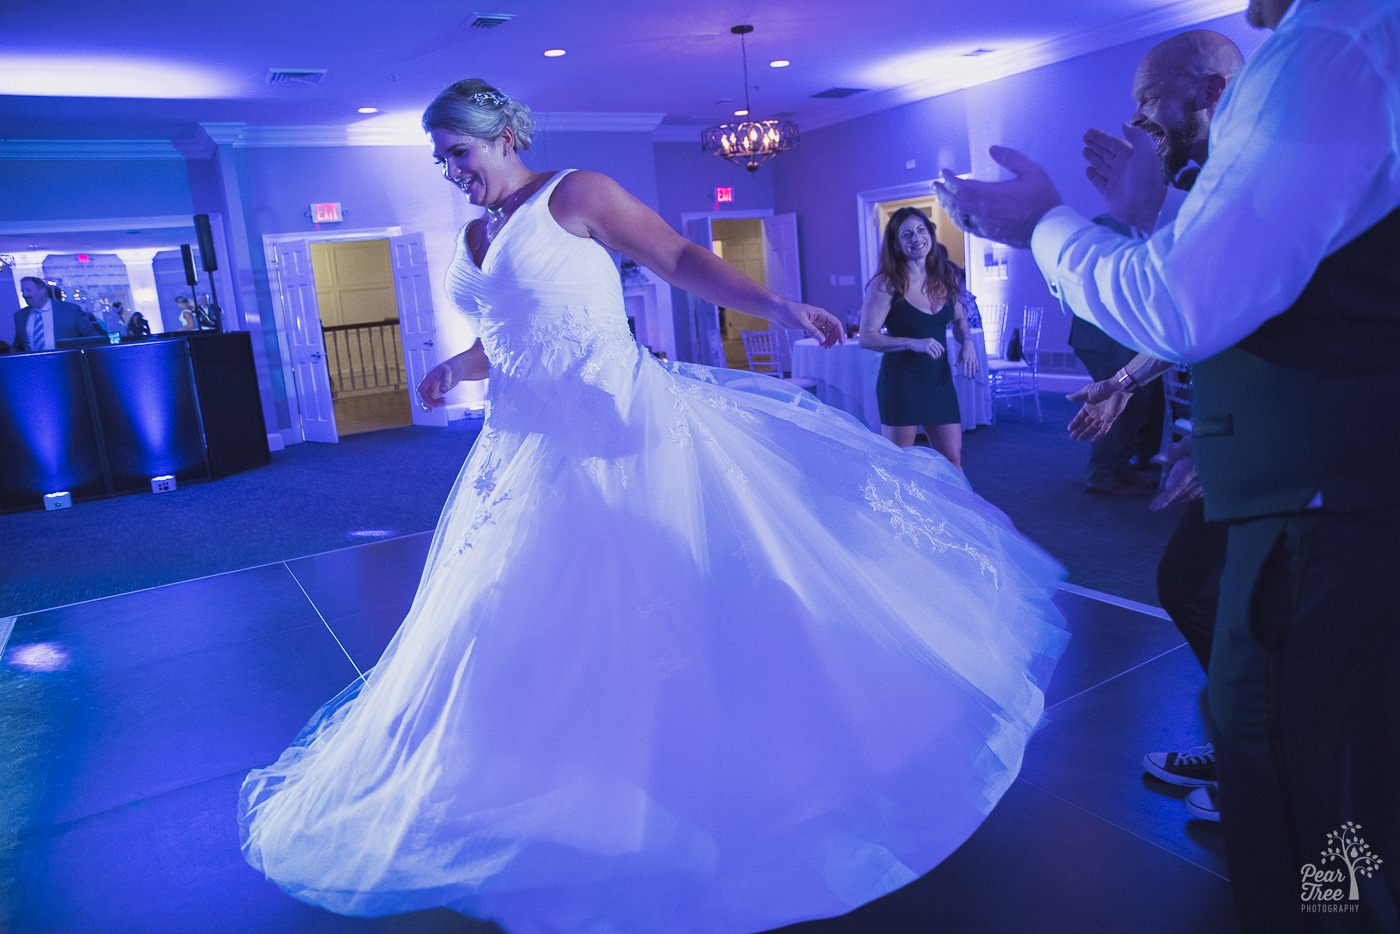 Beautiful blond bride spinning on the dance floor as her wedding dress flares out under purple lights